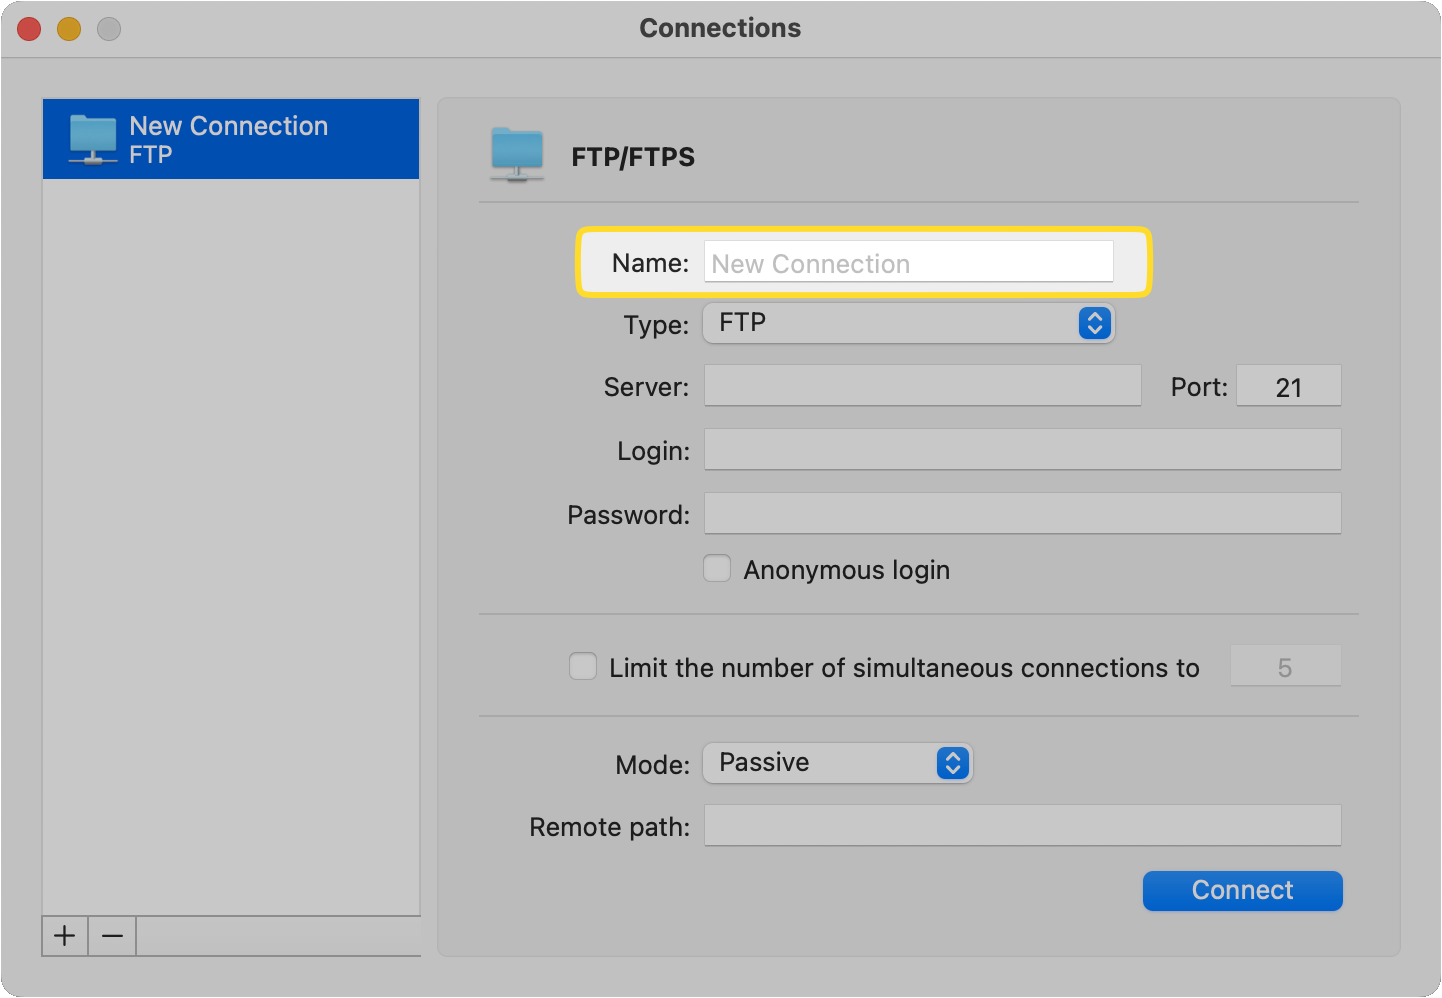 The Name field of the new FTP connection is outlined